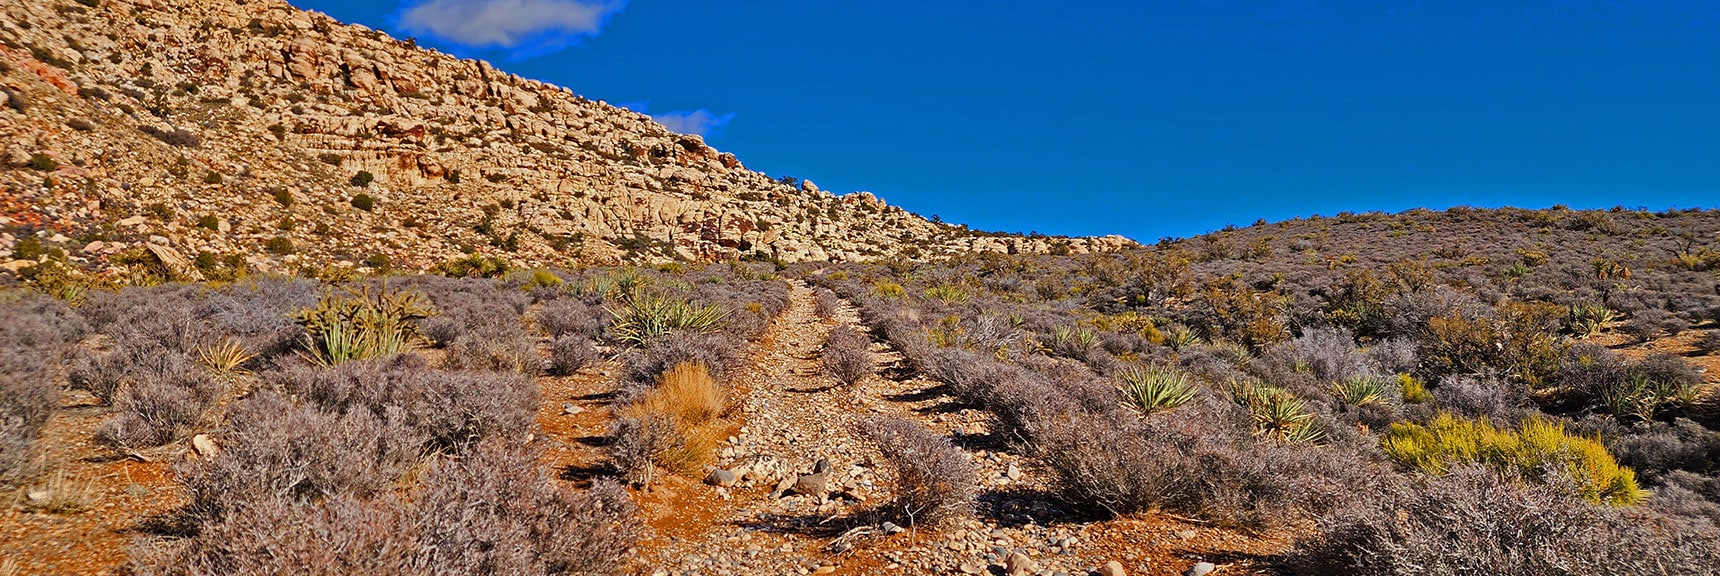 Trail Looks Like an Old Road, Like Many Trails in Red Rock Canyon | White Rock Mountain Loop Trail | Red Rock Canyon, Nevada